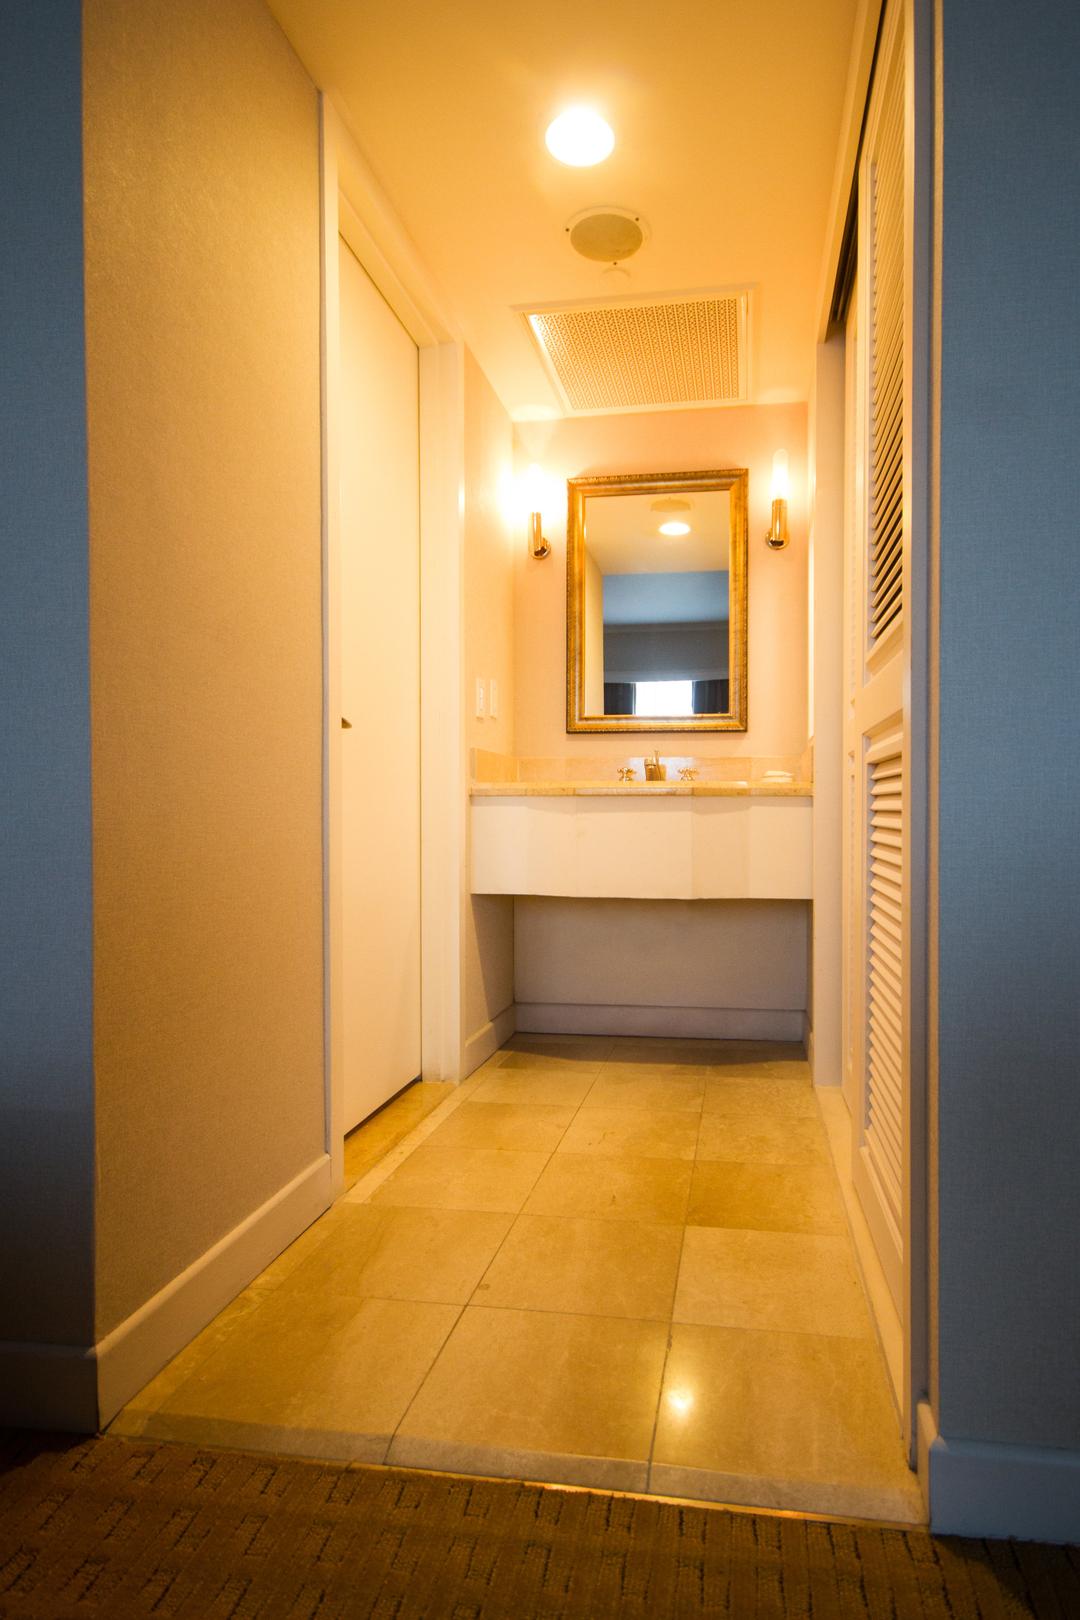 Suites feature two lavatories and extra closet space.